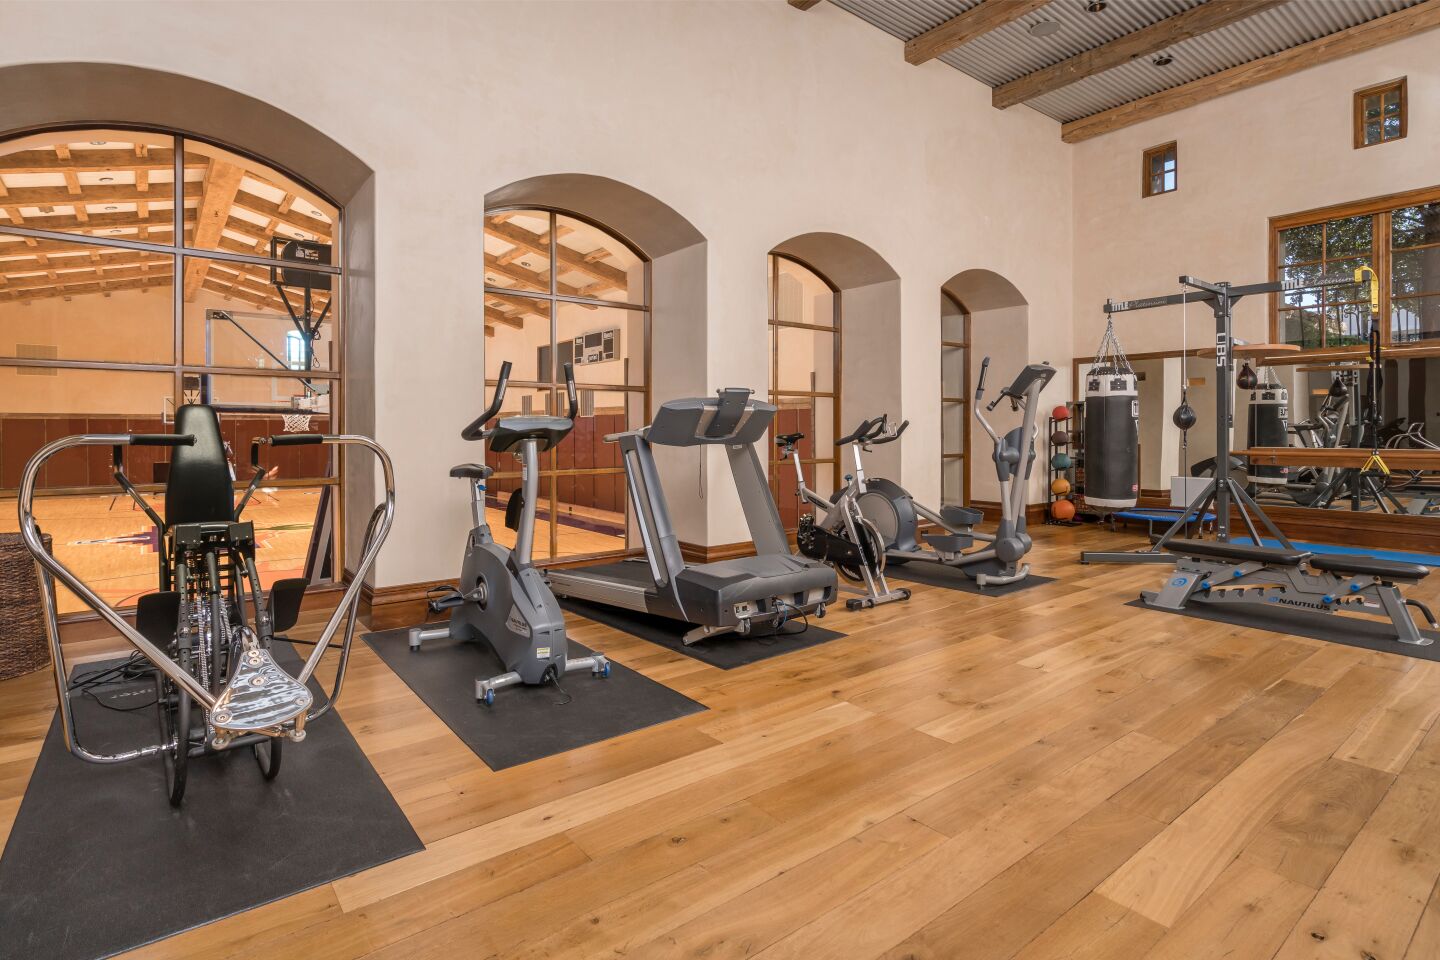 The gym with various kinds of exercise equipment.